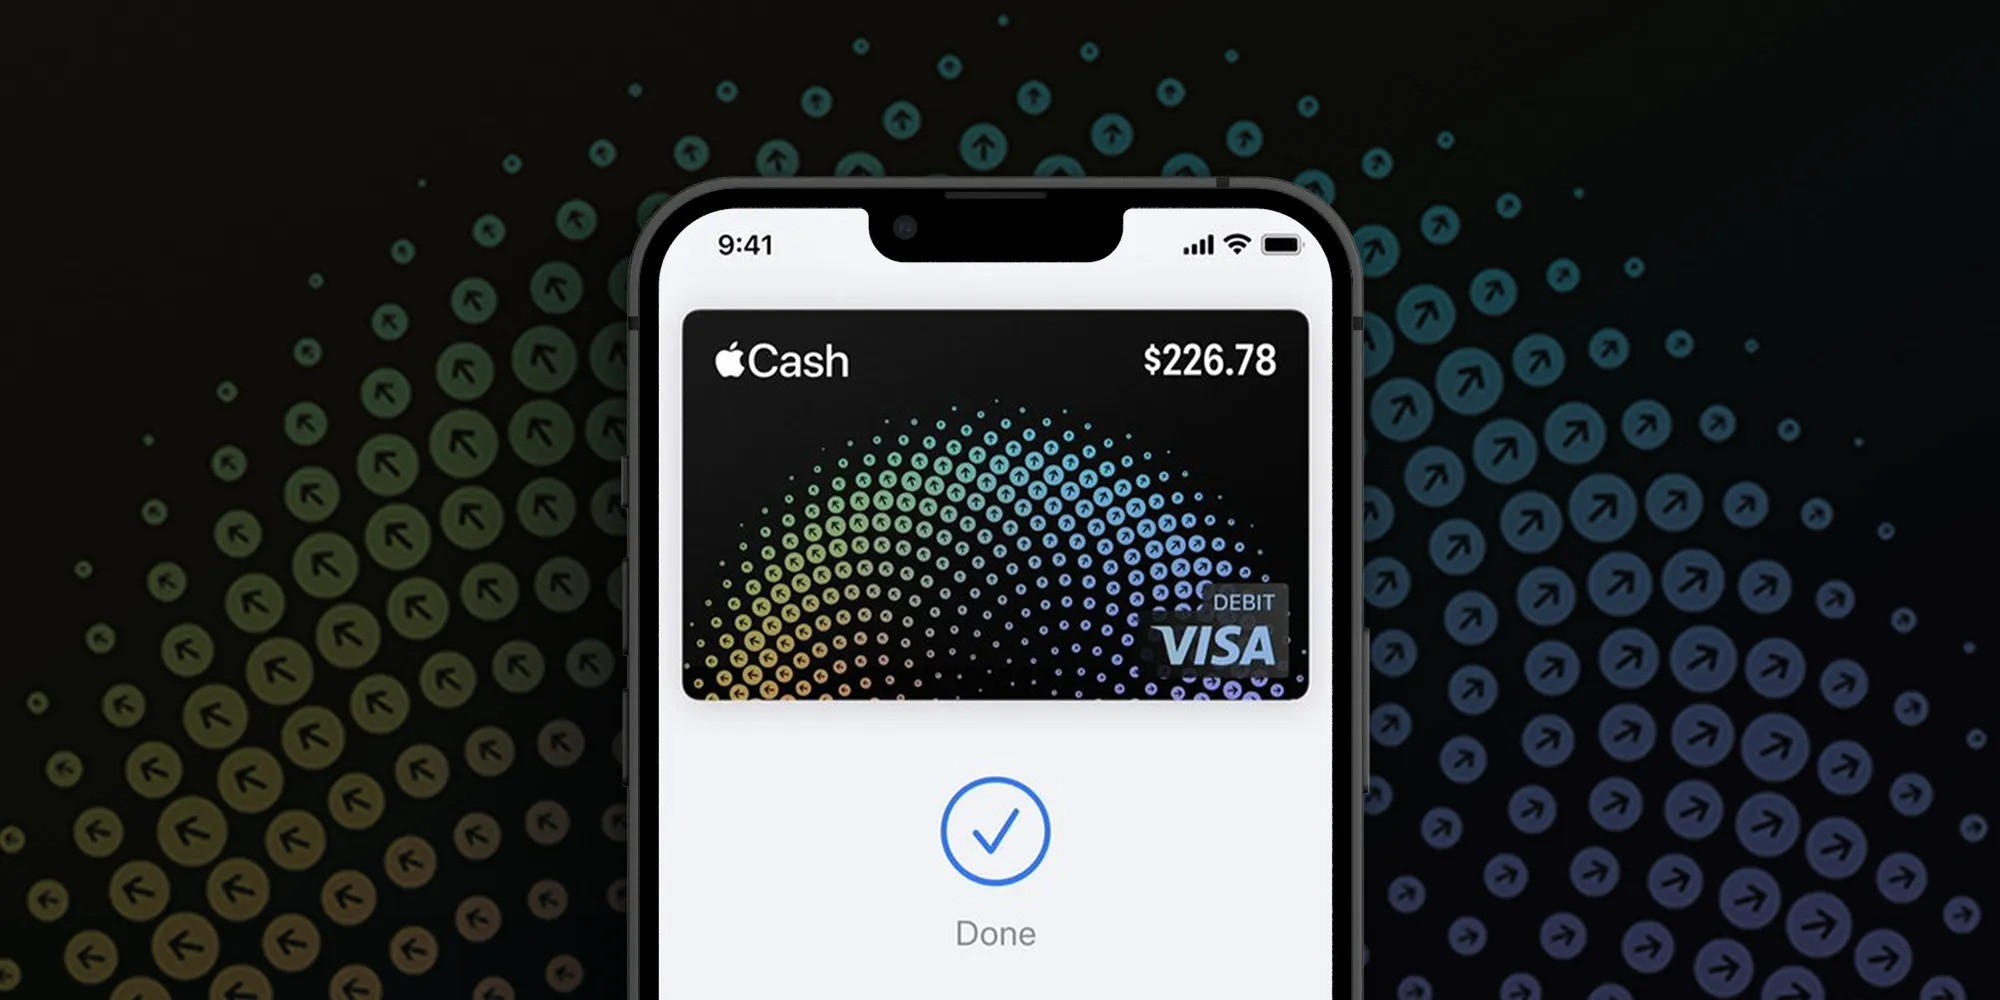 Apple Account Card vs Apple Cash: What’s the difference?